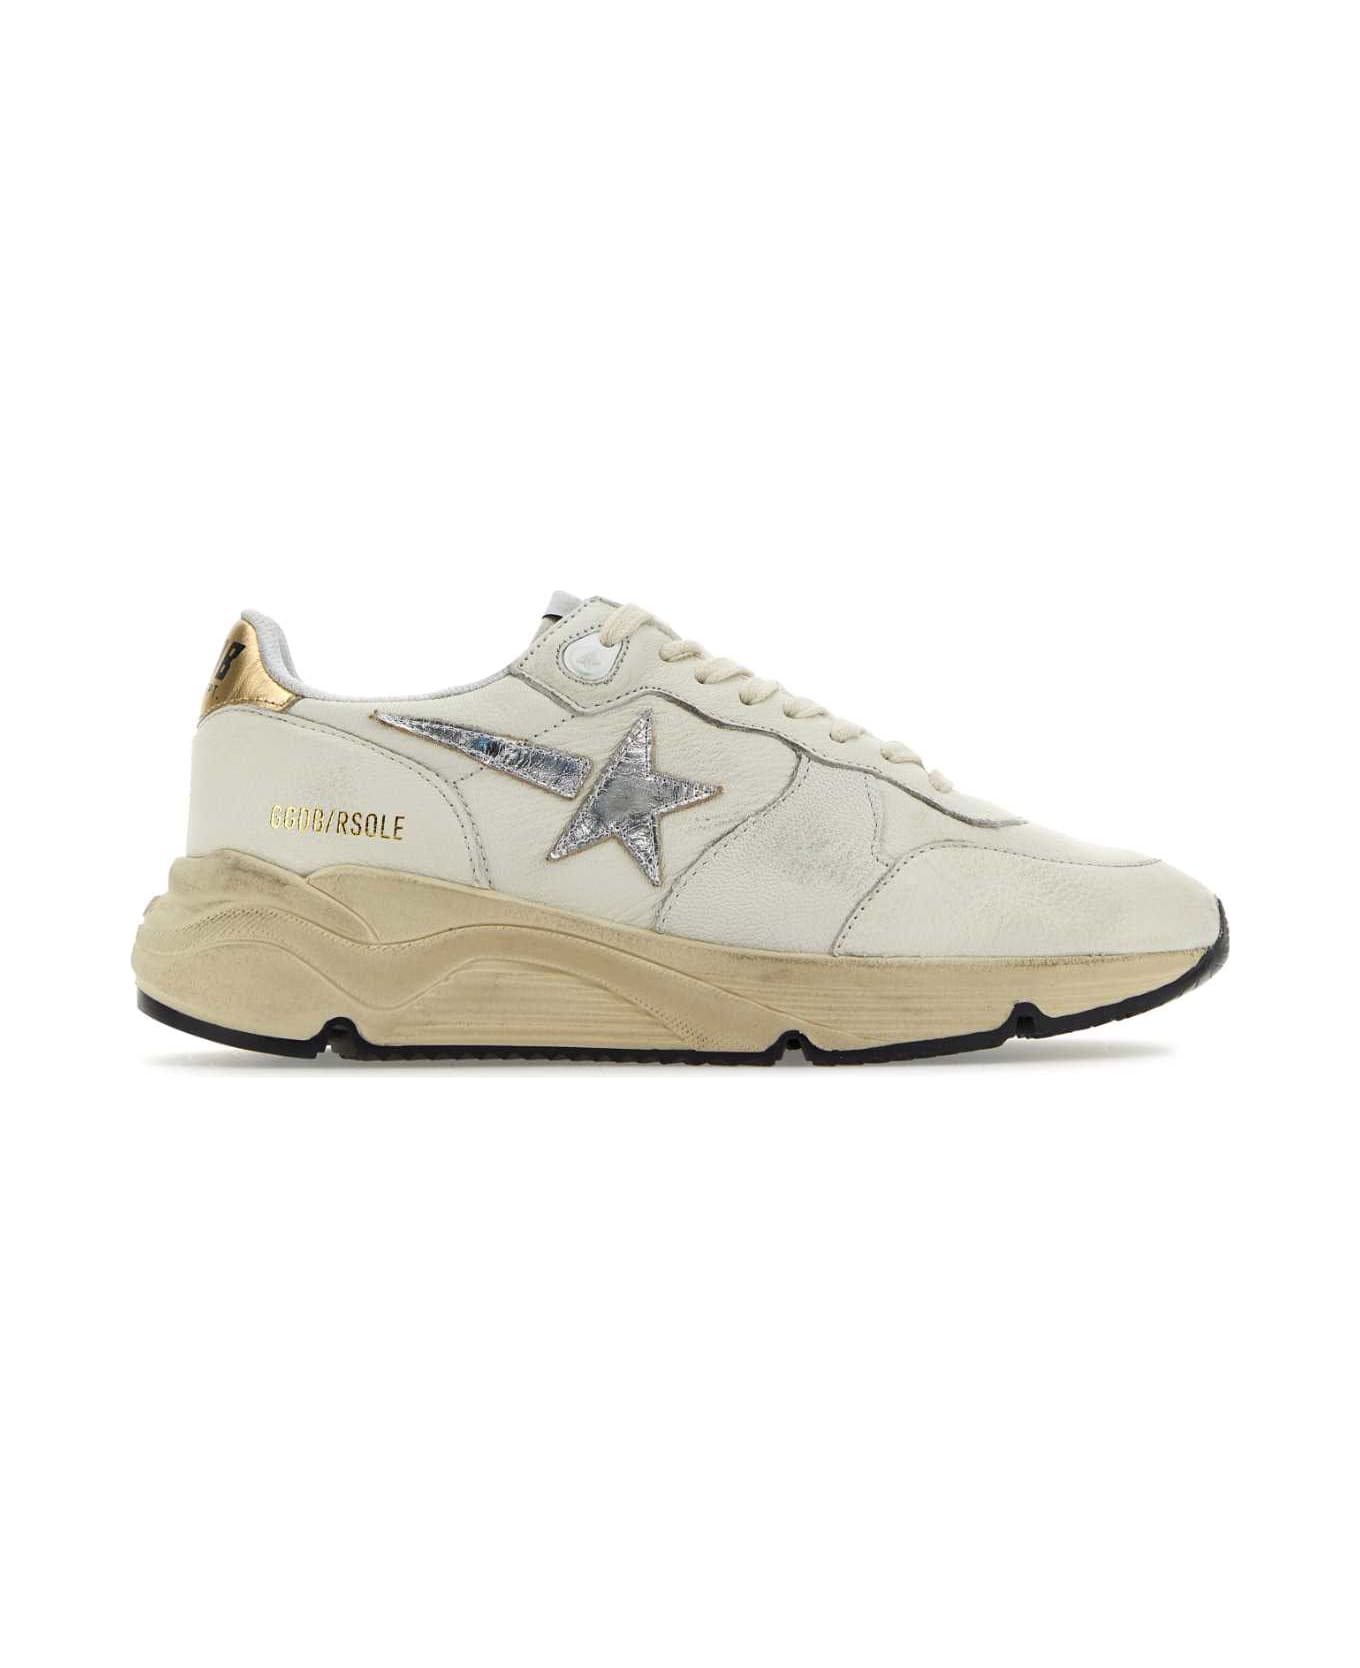 Golden Goose Ivory Leather Running Sole Sneakers - WHITESILVERGOLD